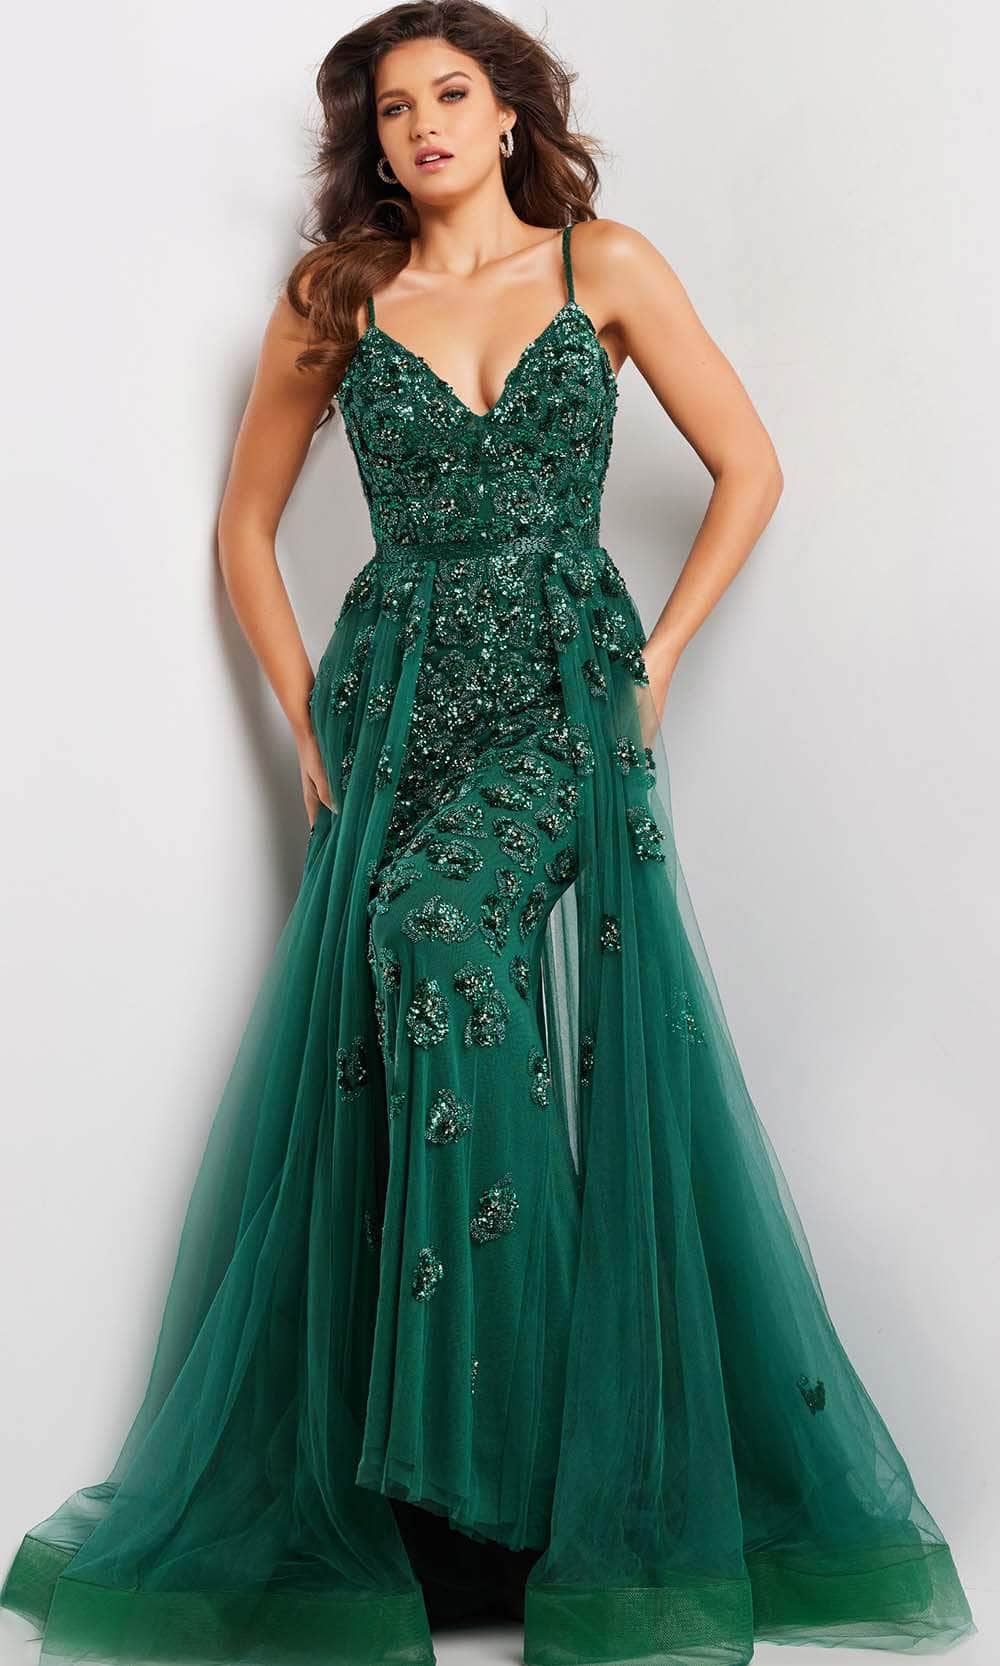 Image of Jovani 39434 - Sequin Embellished Prom Gown